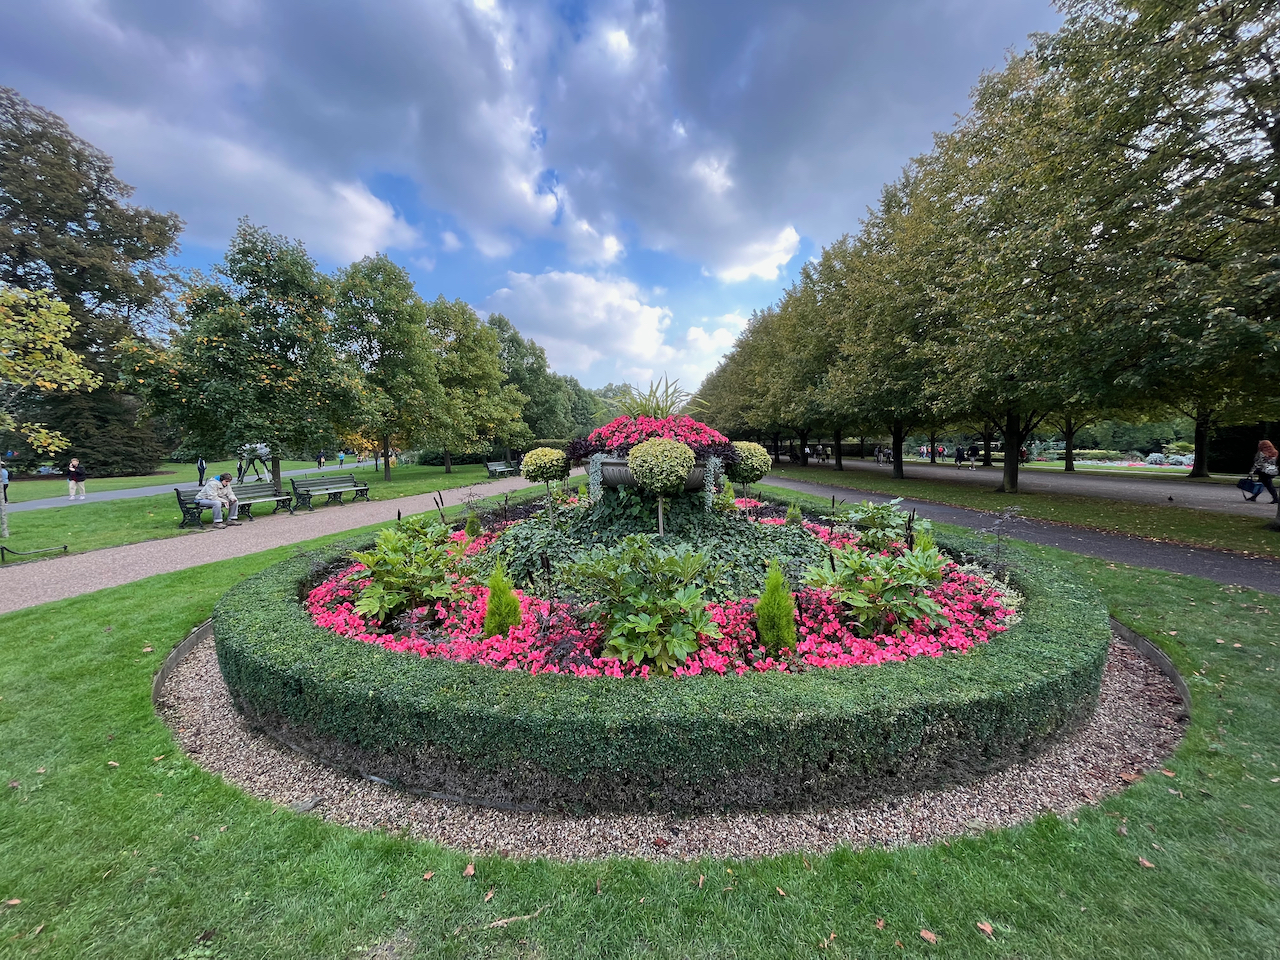 Large flowerbed stretching into the distance, surrounded by a low green border hedge that curves round at the end. The display contains red flowers and assorted greenery, including small trees with thin stems and round leafy heads, plus a large round metal planter containing more red flowers. Trees and benches line the paths on each side of the flowerbed, while above it all the sky is a dramatic mix of grey and white clouds with patches of blue sky.